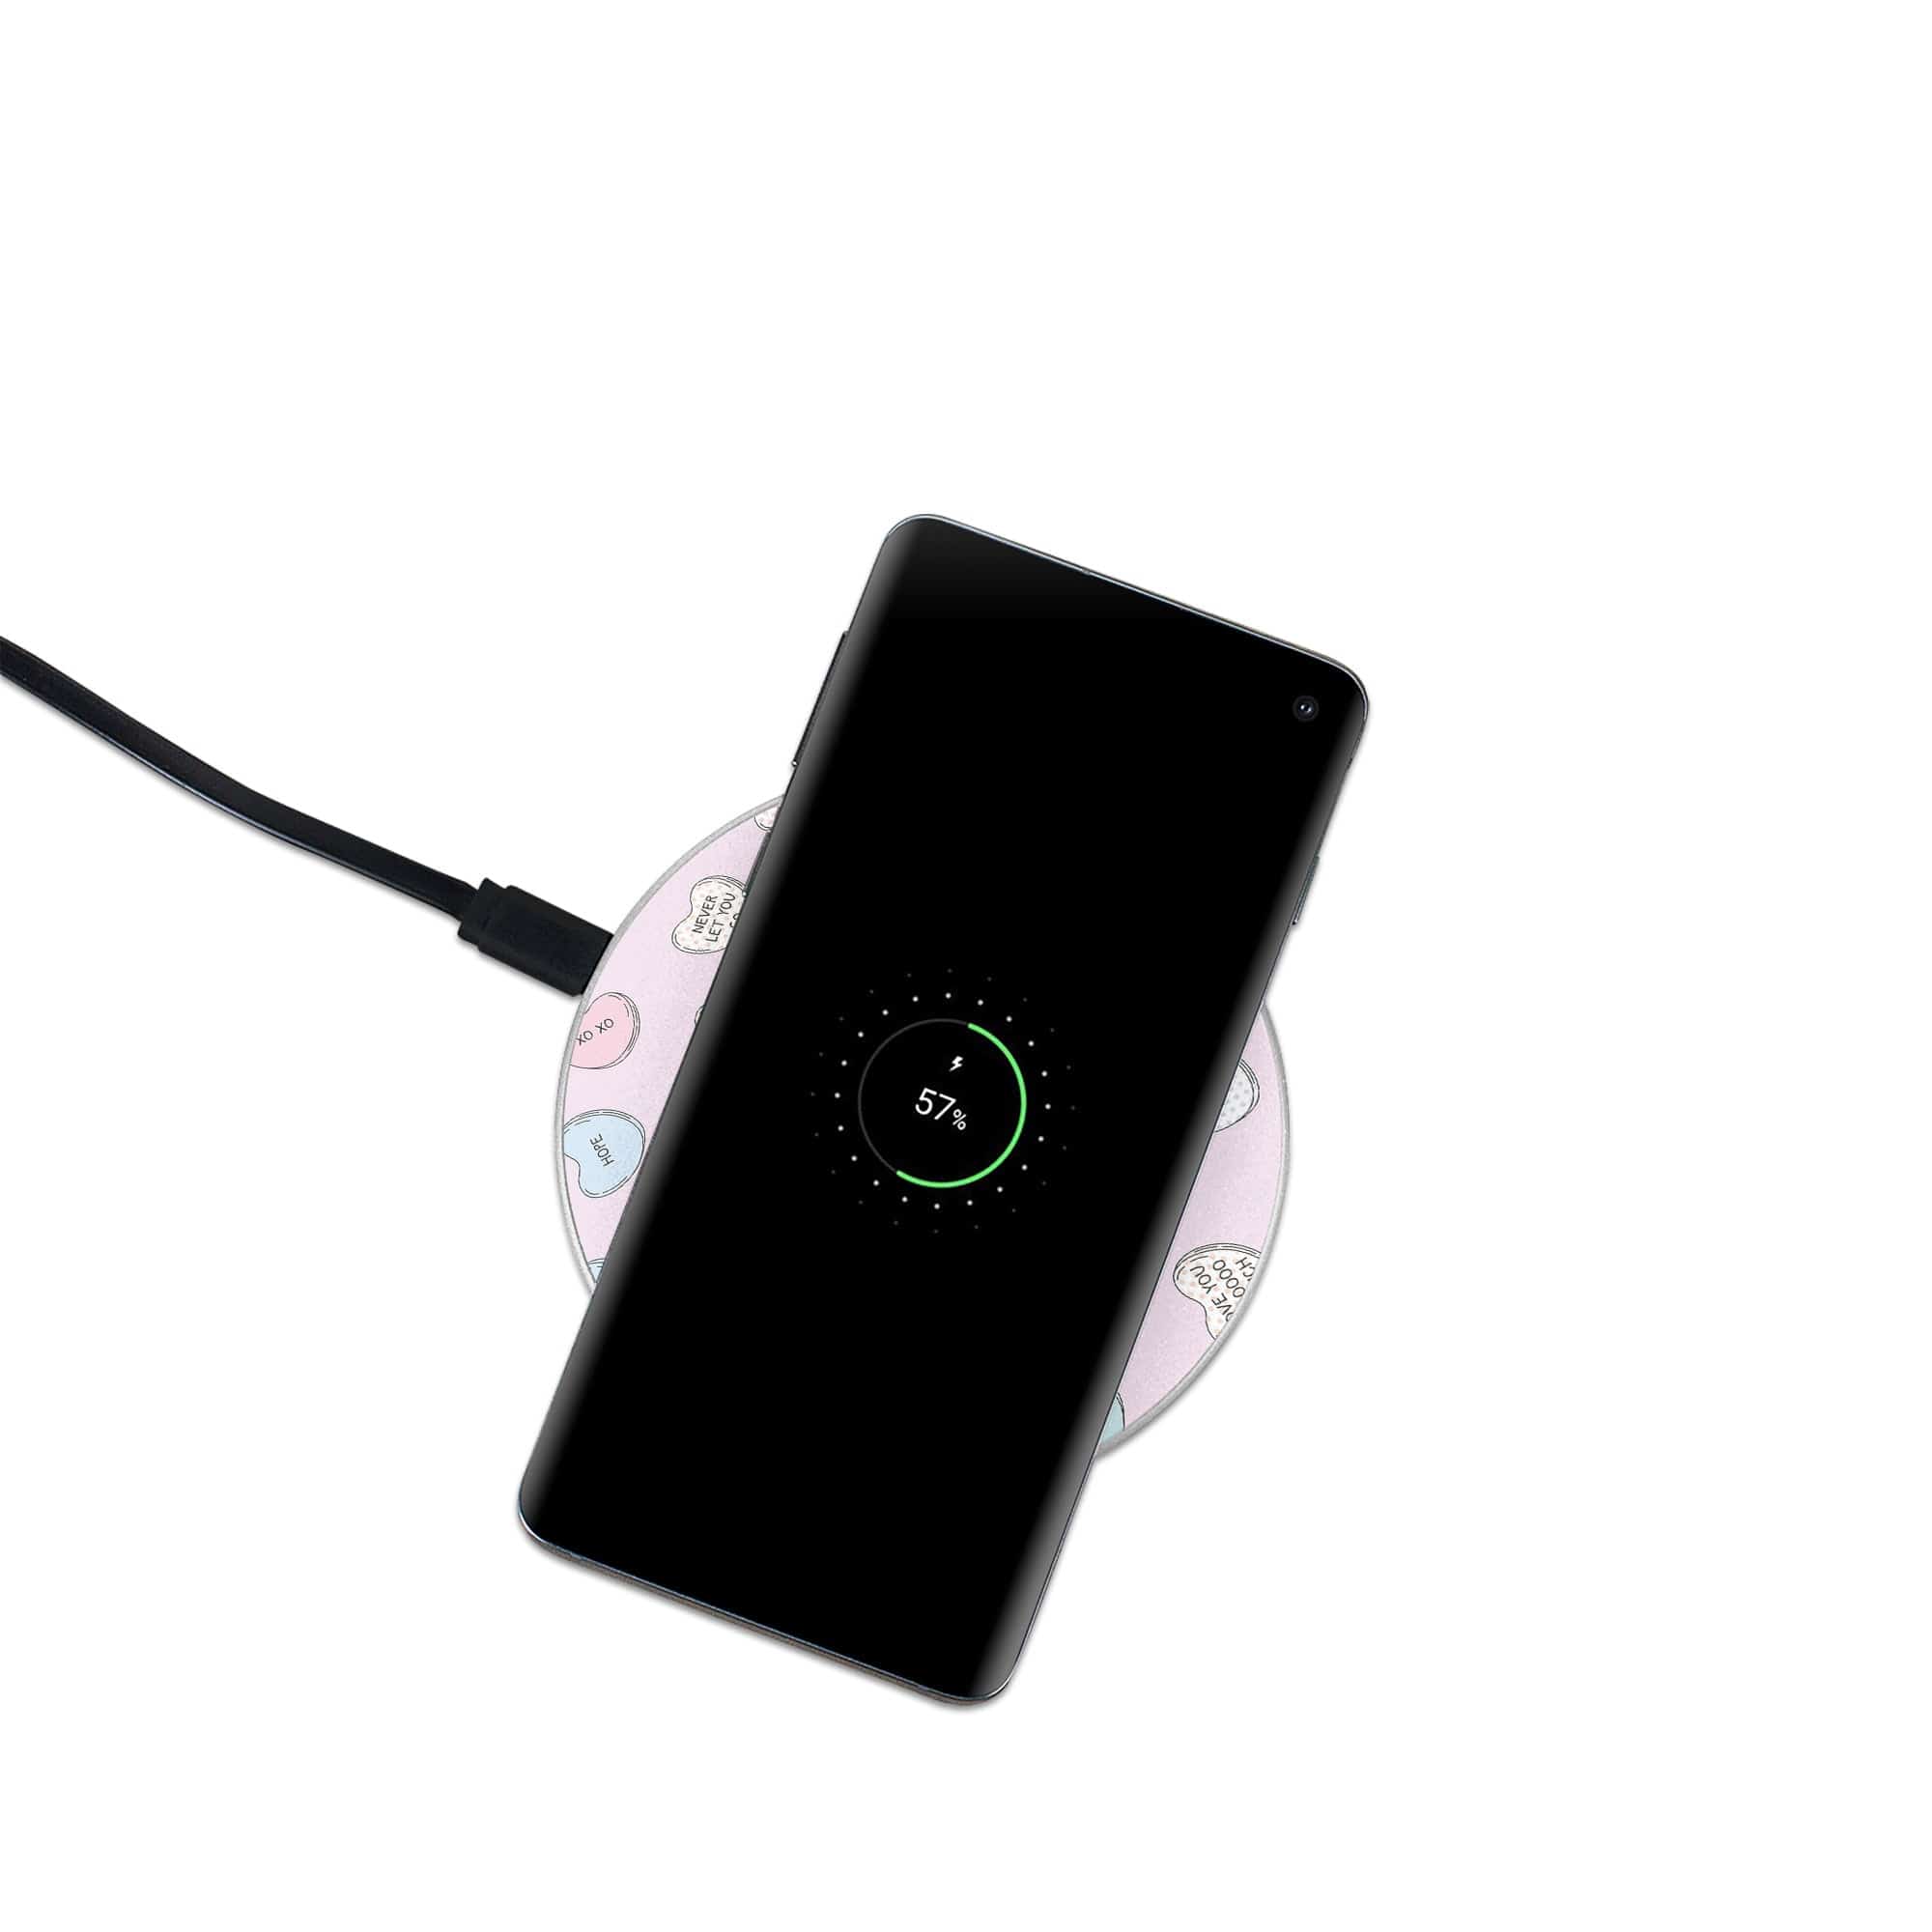 Sweet Nothings | Candy Hearts Wireless Charging Pad